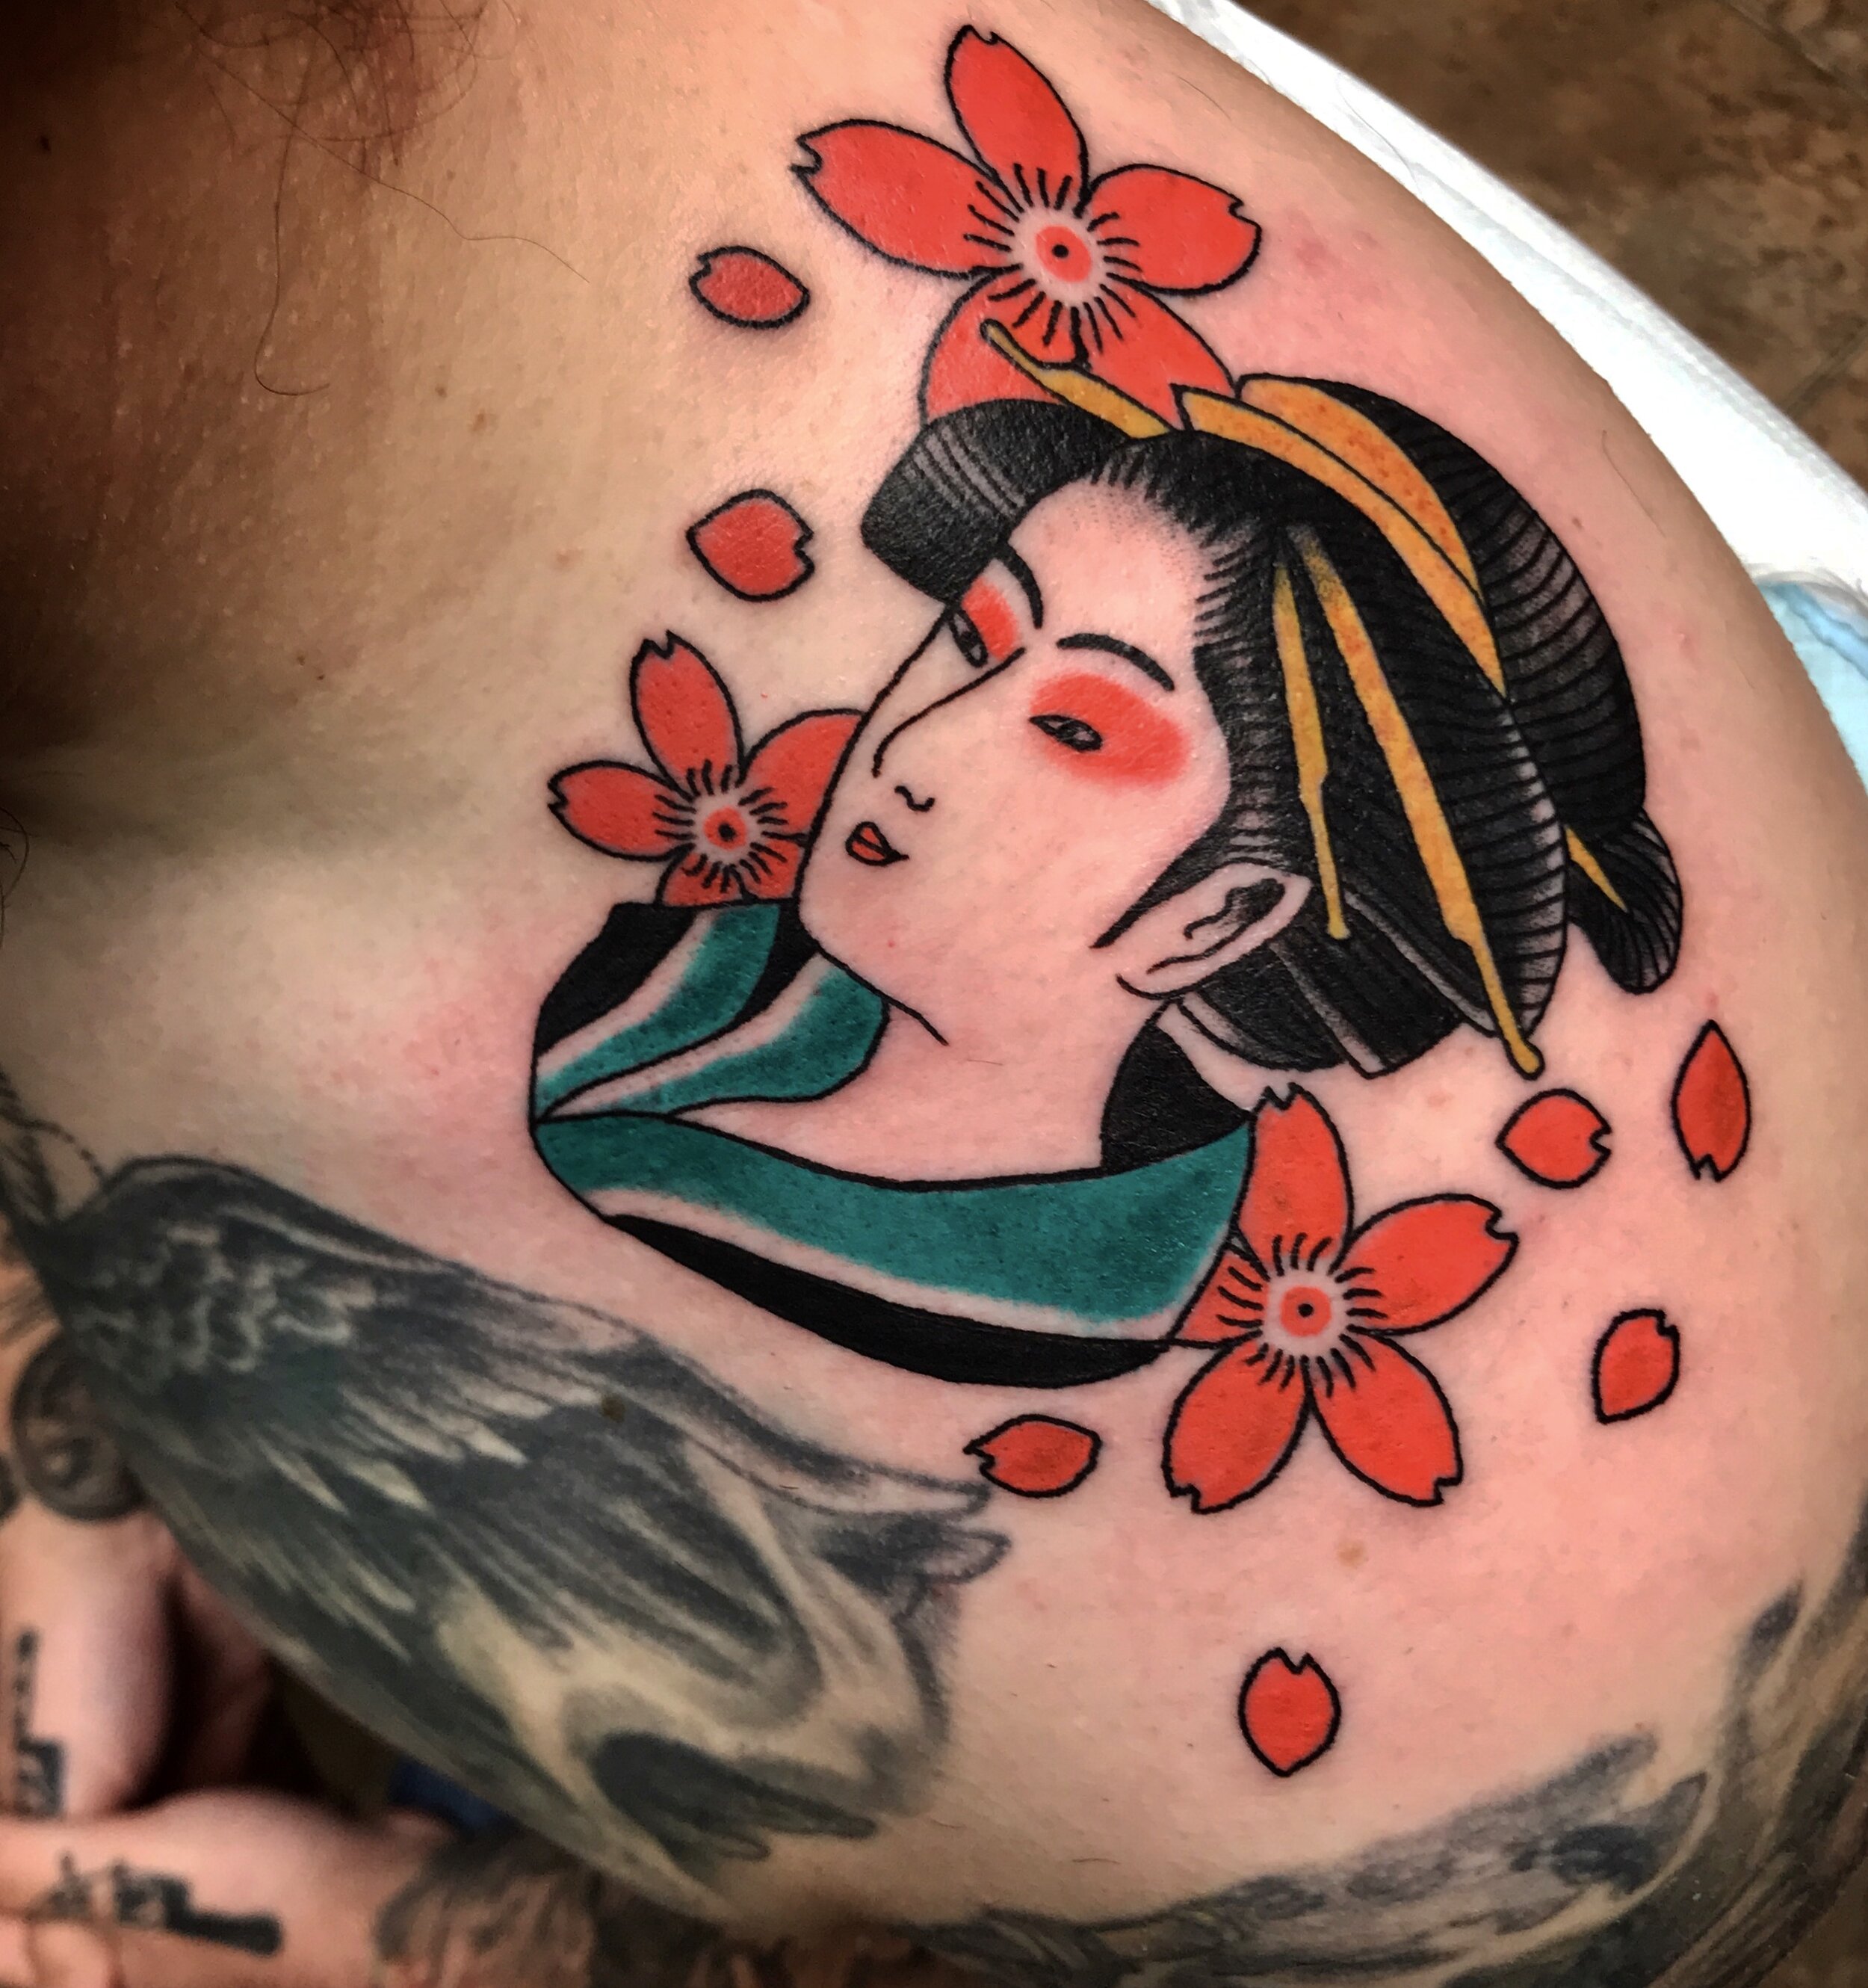 Flowery Branch tattoo shop helping survivors cover painful past   Gainesville Times